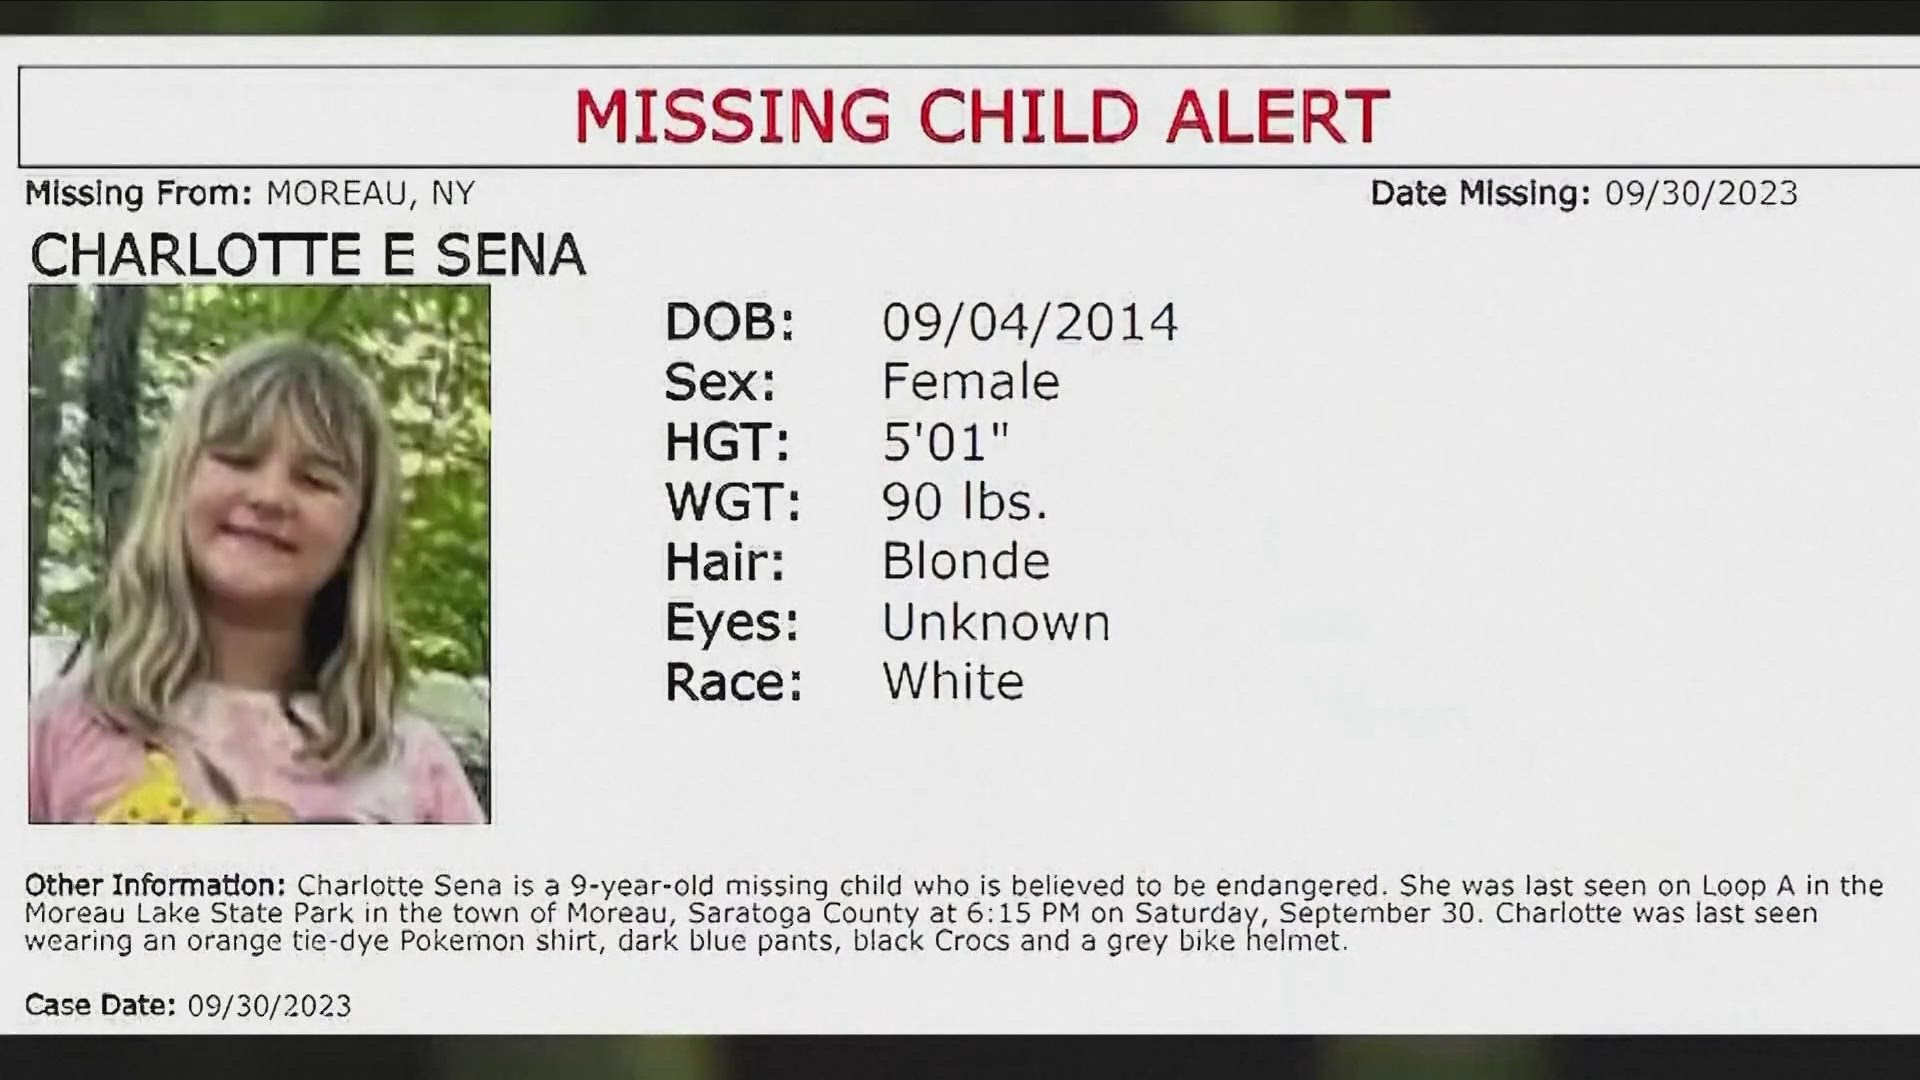 SHE WAS LAST SEEN AROUND 6-15 SATURDAY NIGHT IN MOREAU LAKE STATE PARK IN SARATOGA COUNTY.